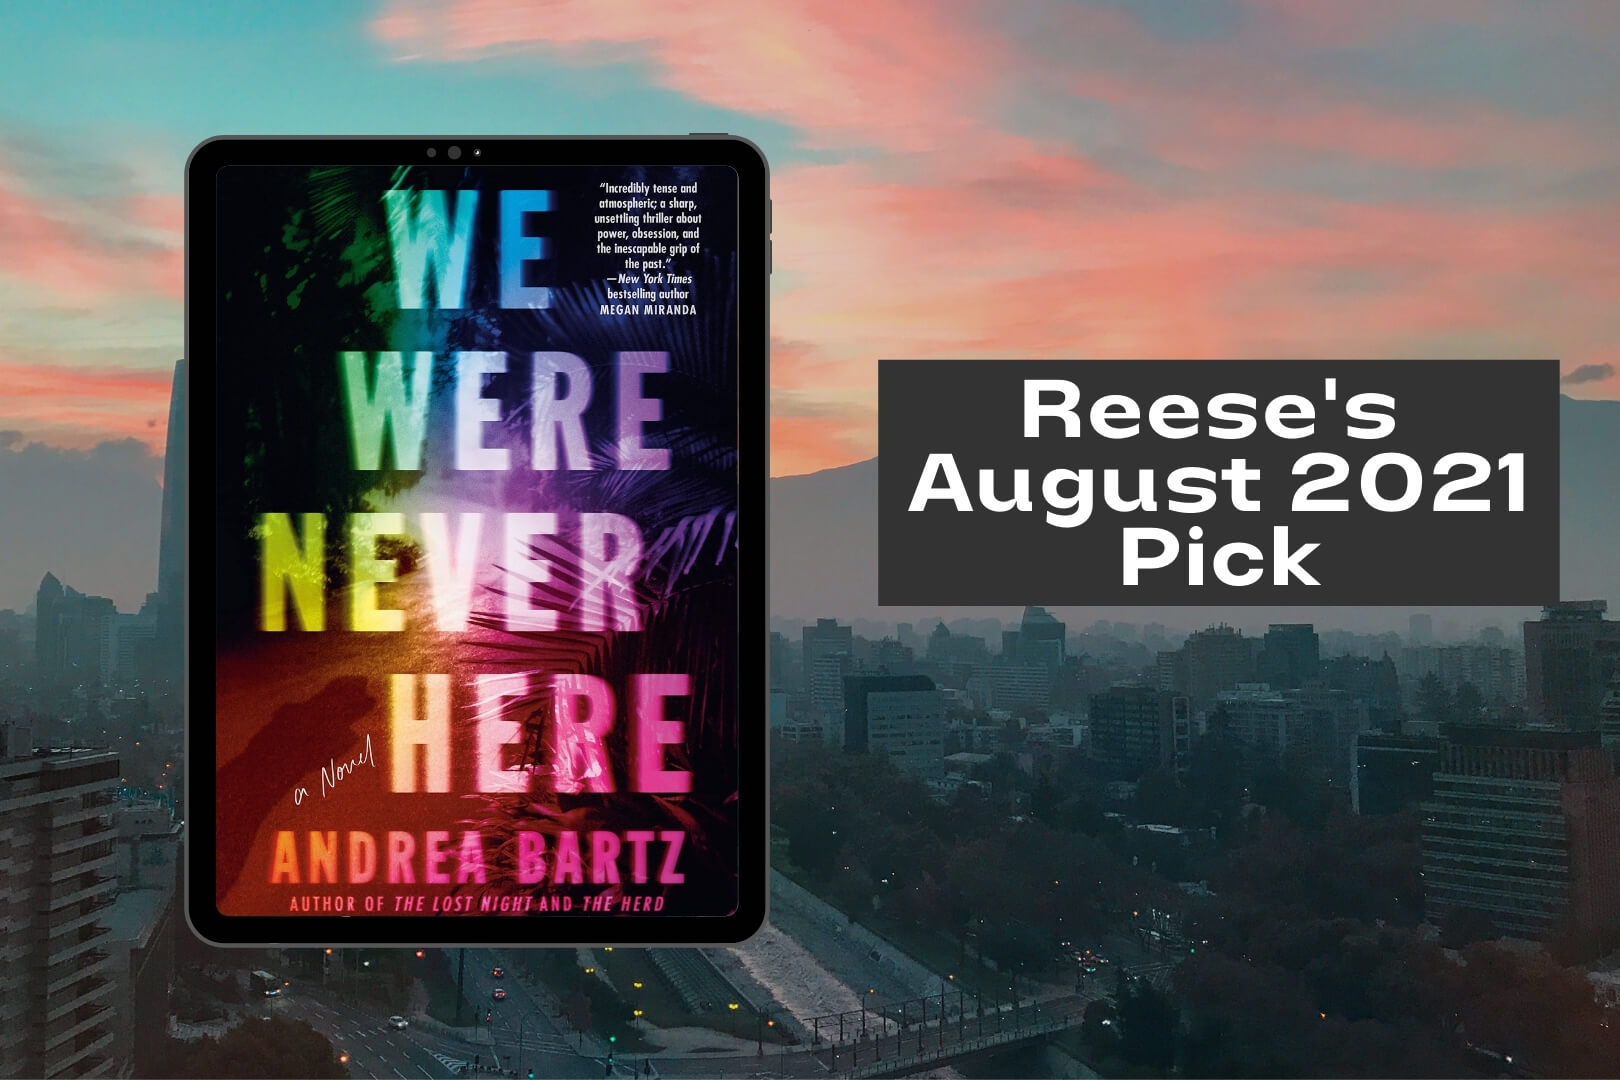 Reese’s August 2021 Book Club Pick is We Were Never Here by Andrea Bartz